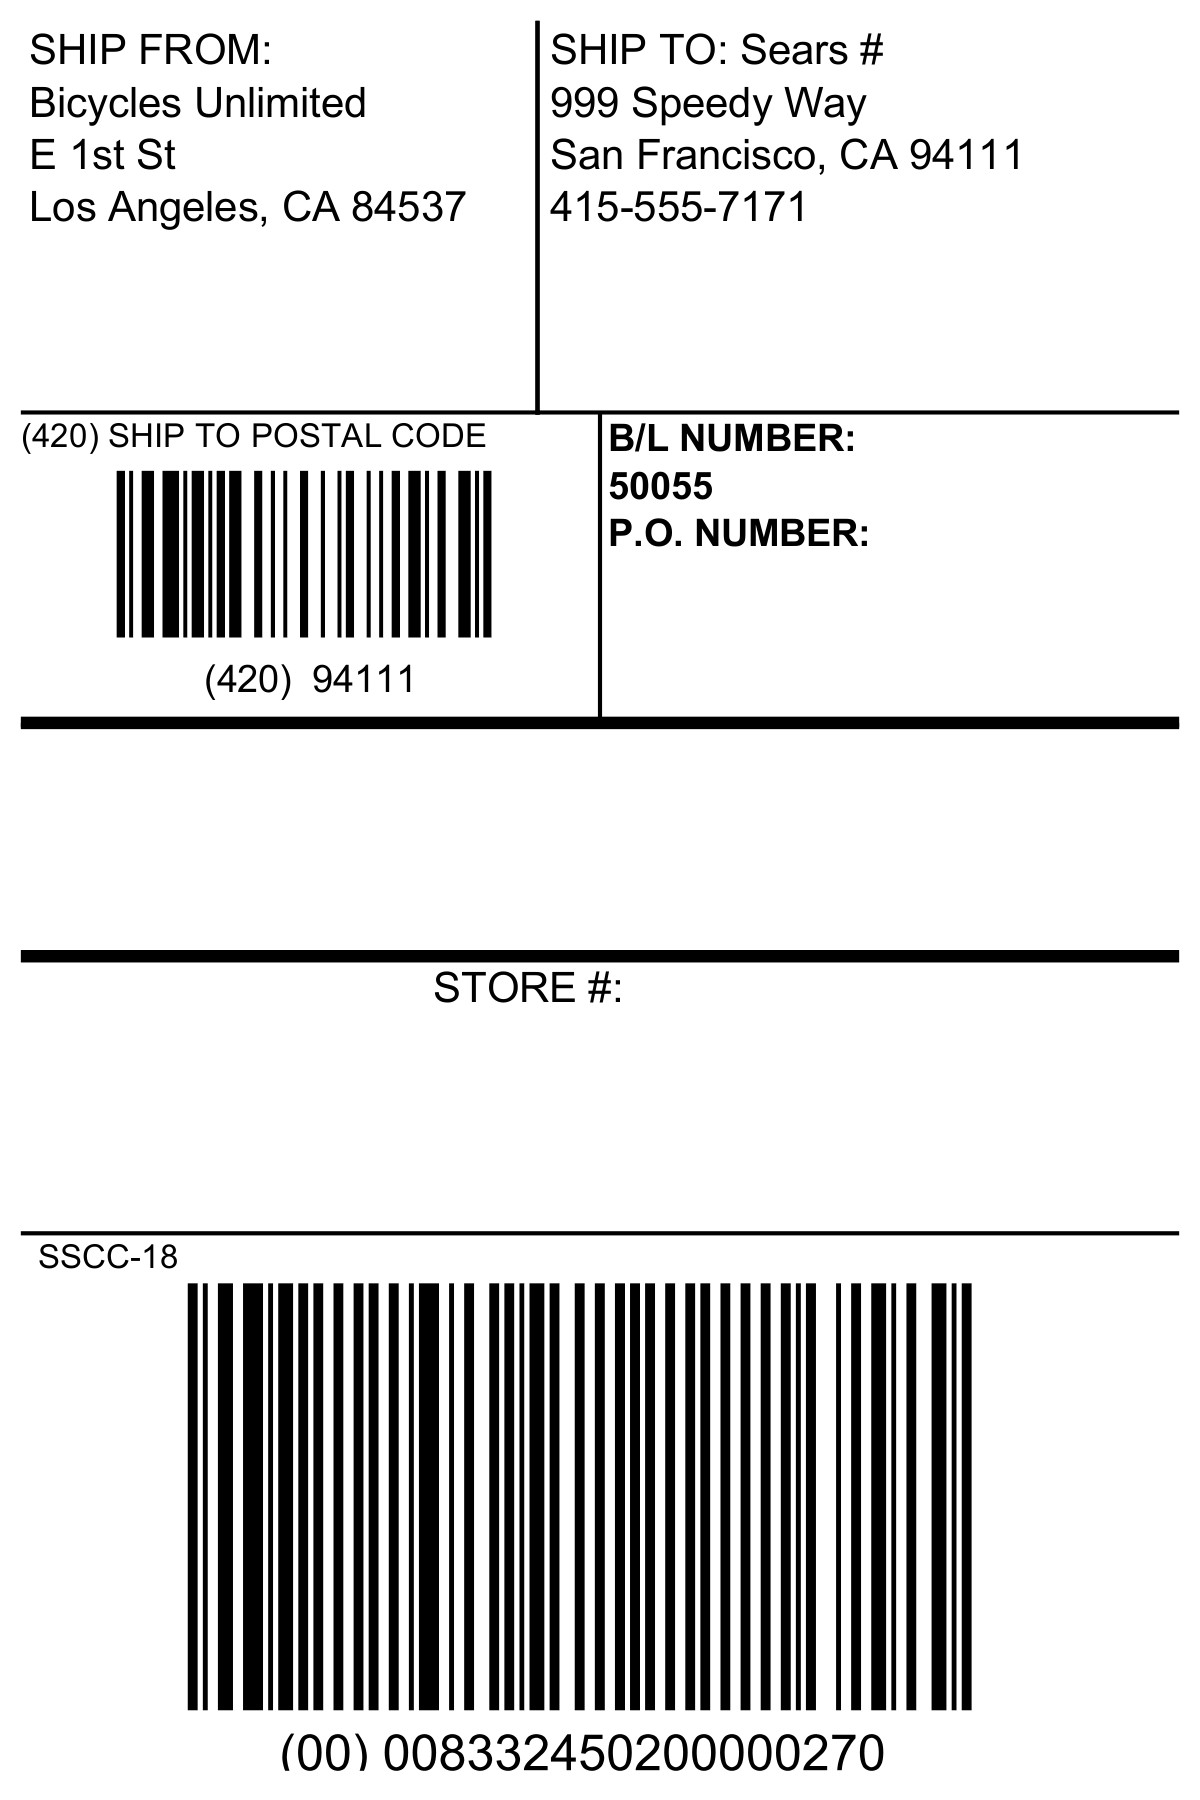 Fishbowl Labels and Barcodes EDI 856 Sears